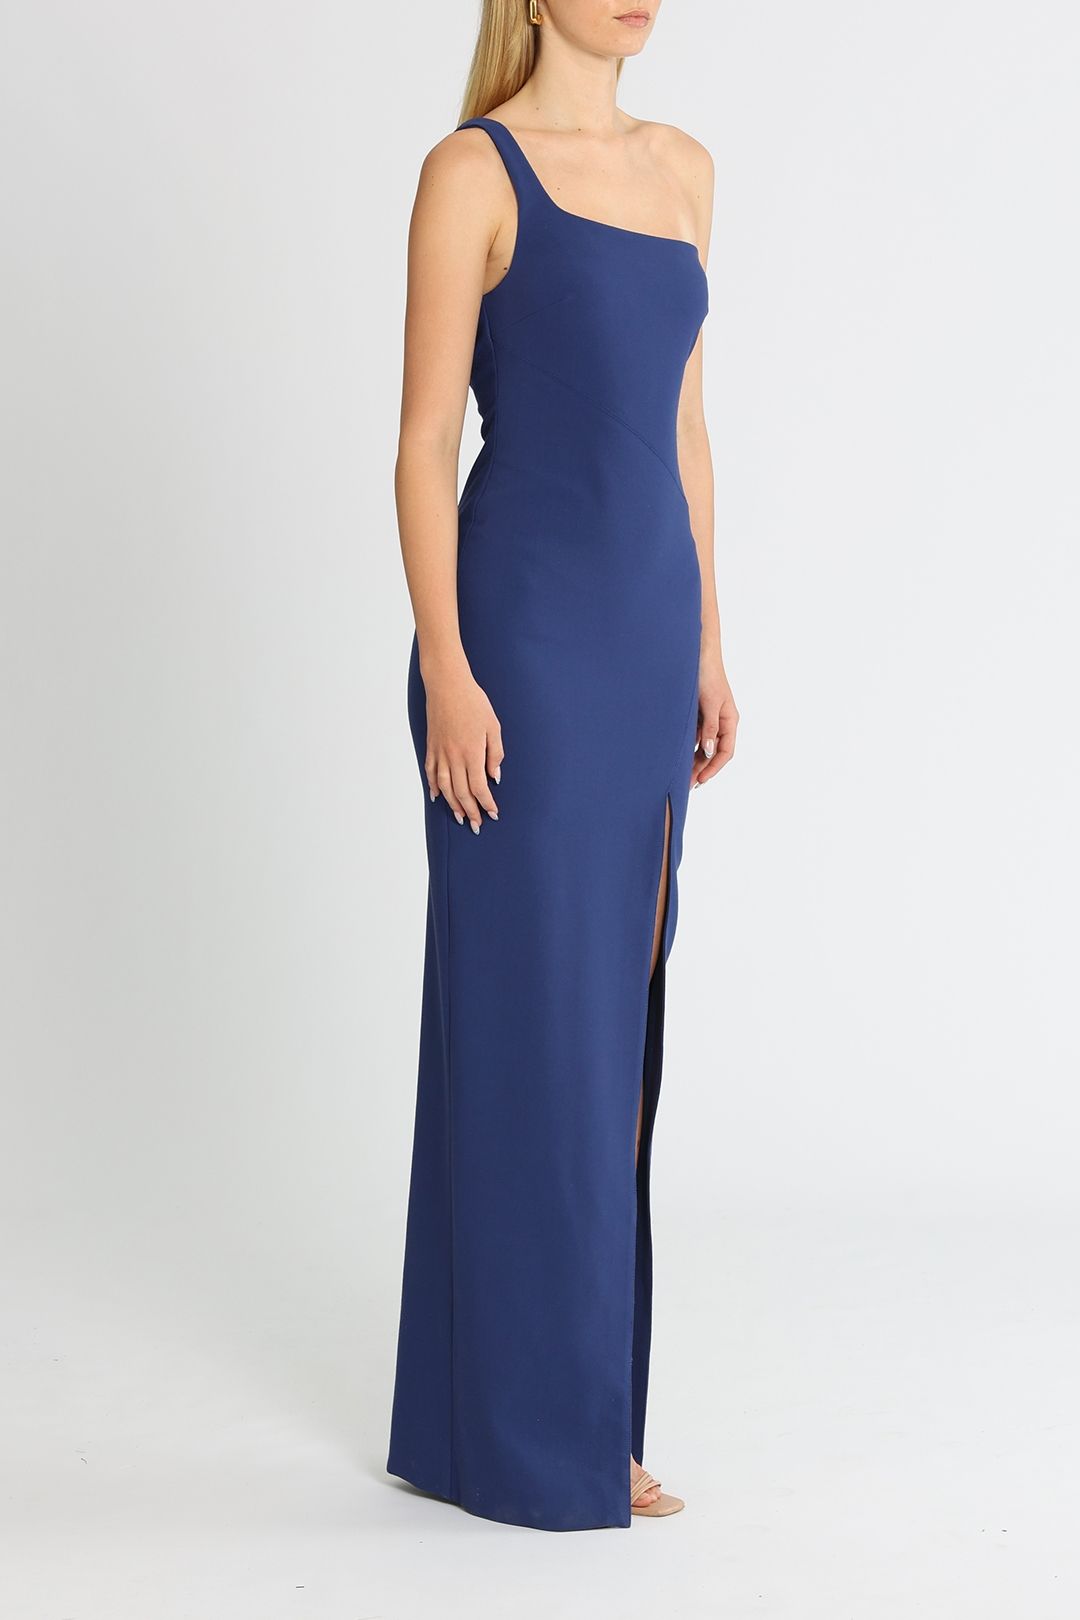 Likely NYC Camden Gown Navy Floor Length